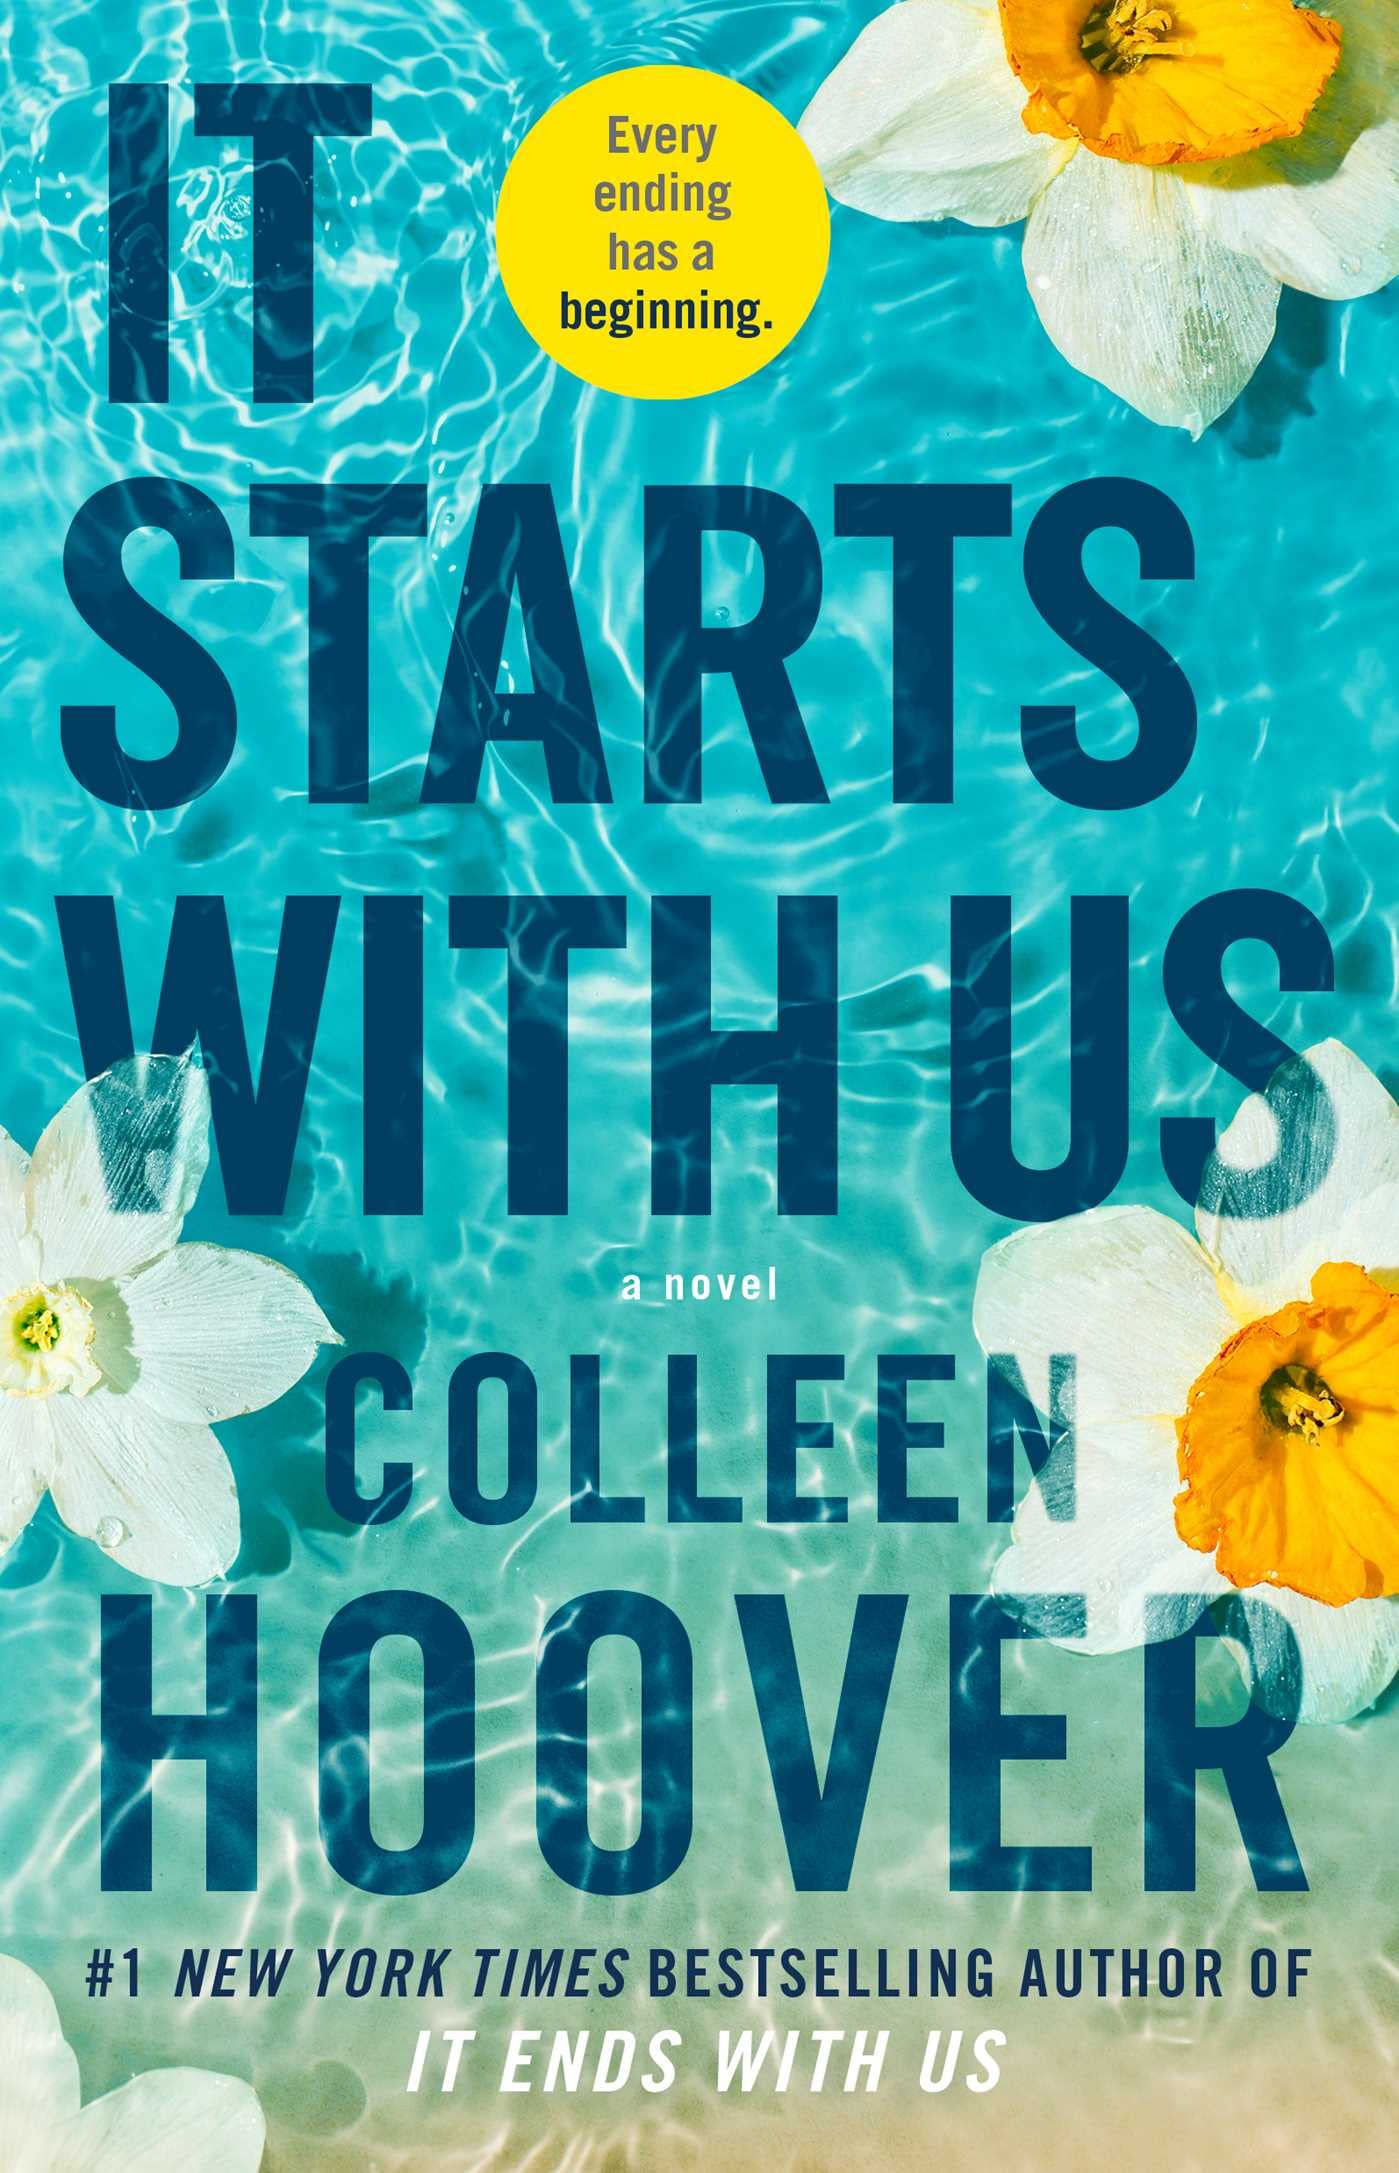 Indicados Goodreads 2022 - It starts with us da cooleen 